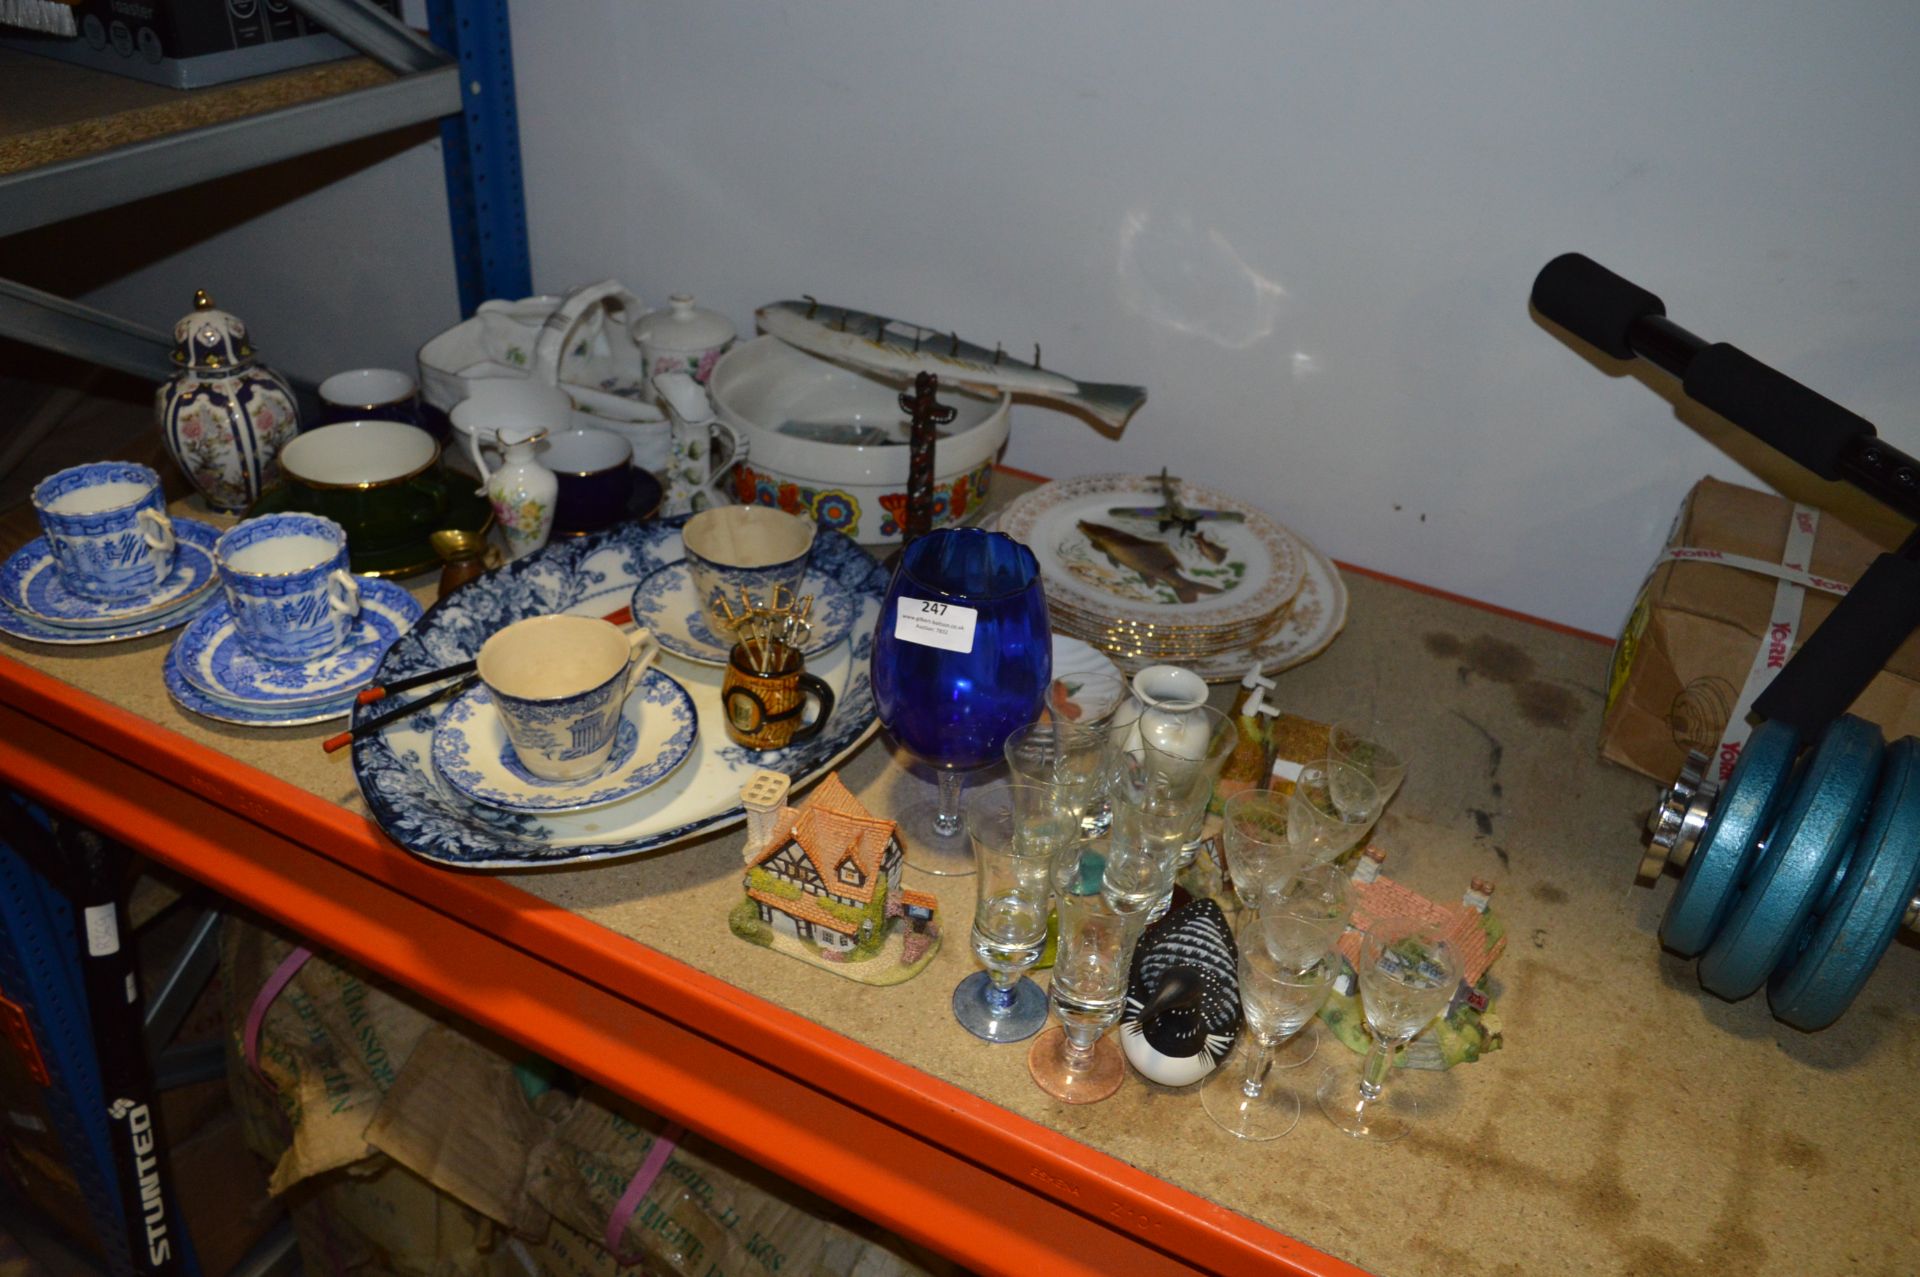 Drinking Glassware, Meat Plates, Decorative Wall Plates, Ornaments, etc.